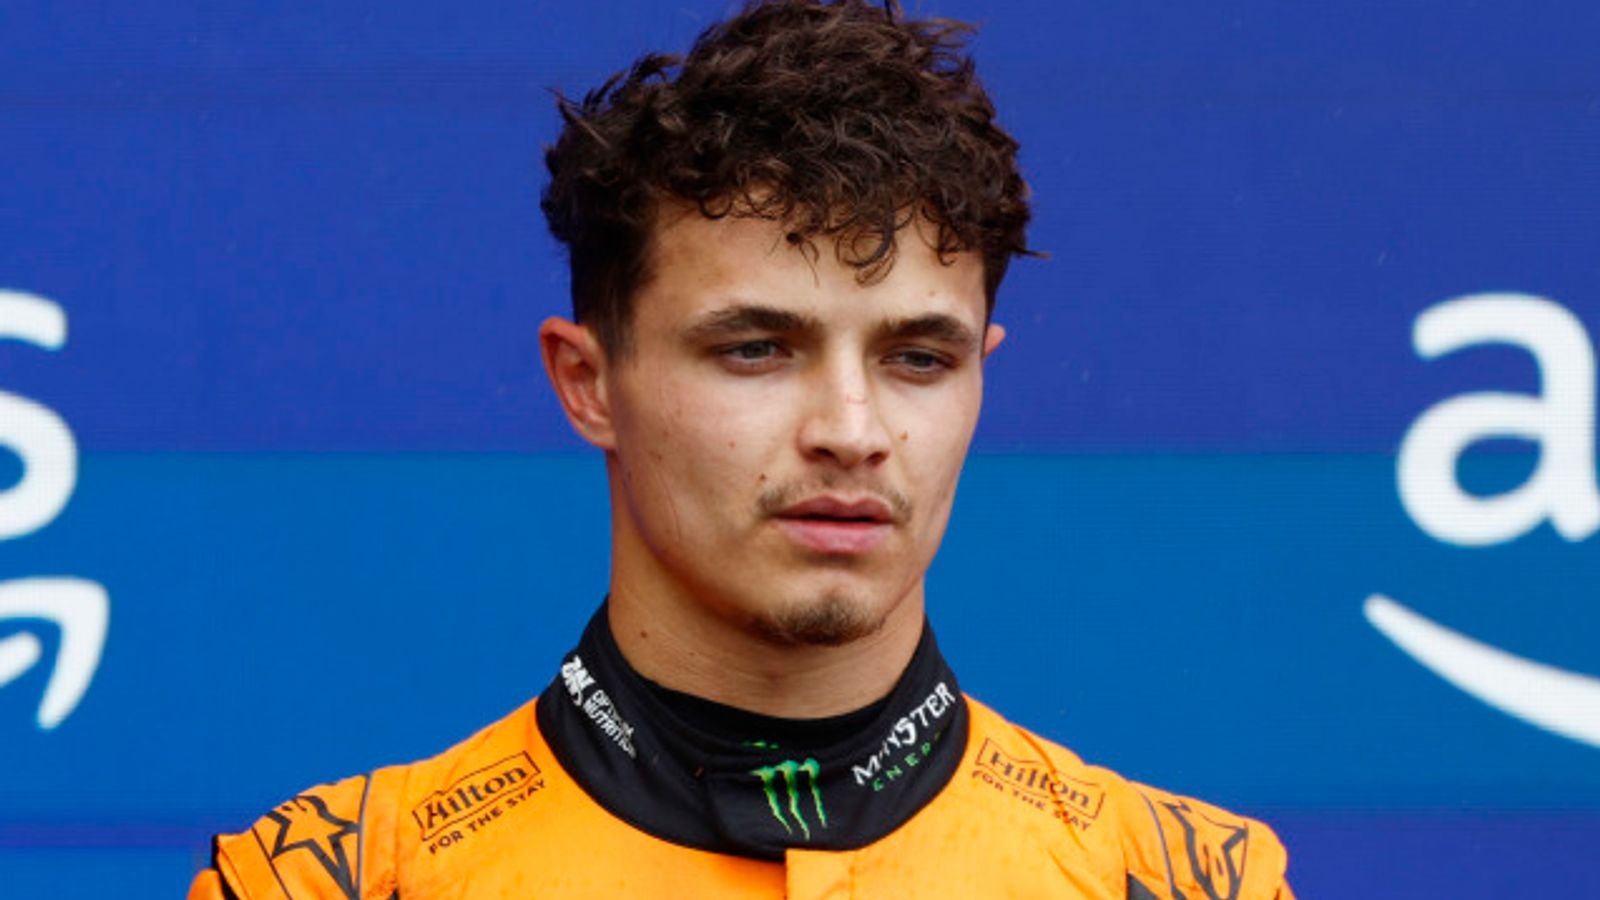 Lando Norris admits McLaren made costly Canadian GP strategy error after losing out to Max Verstappen in Montreal | F1 News